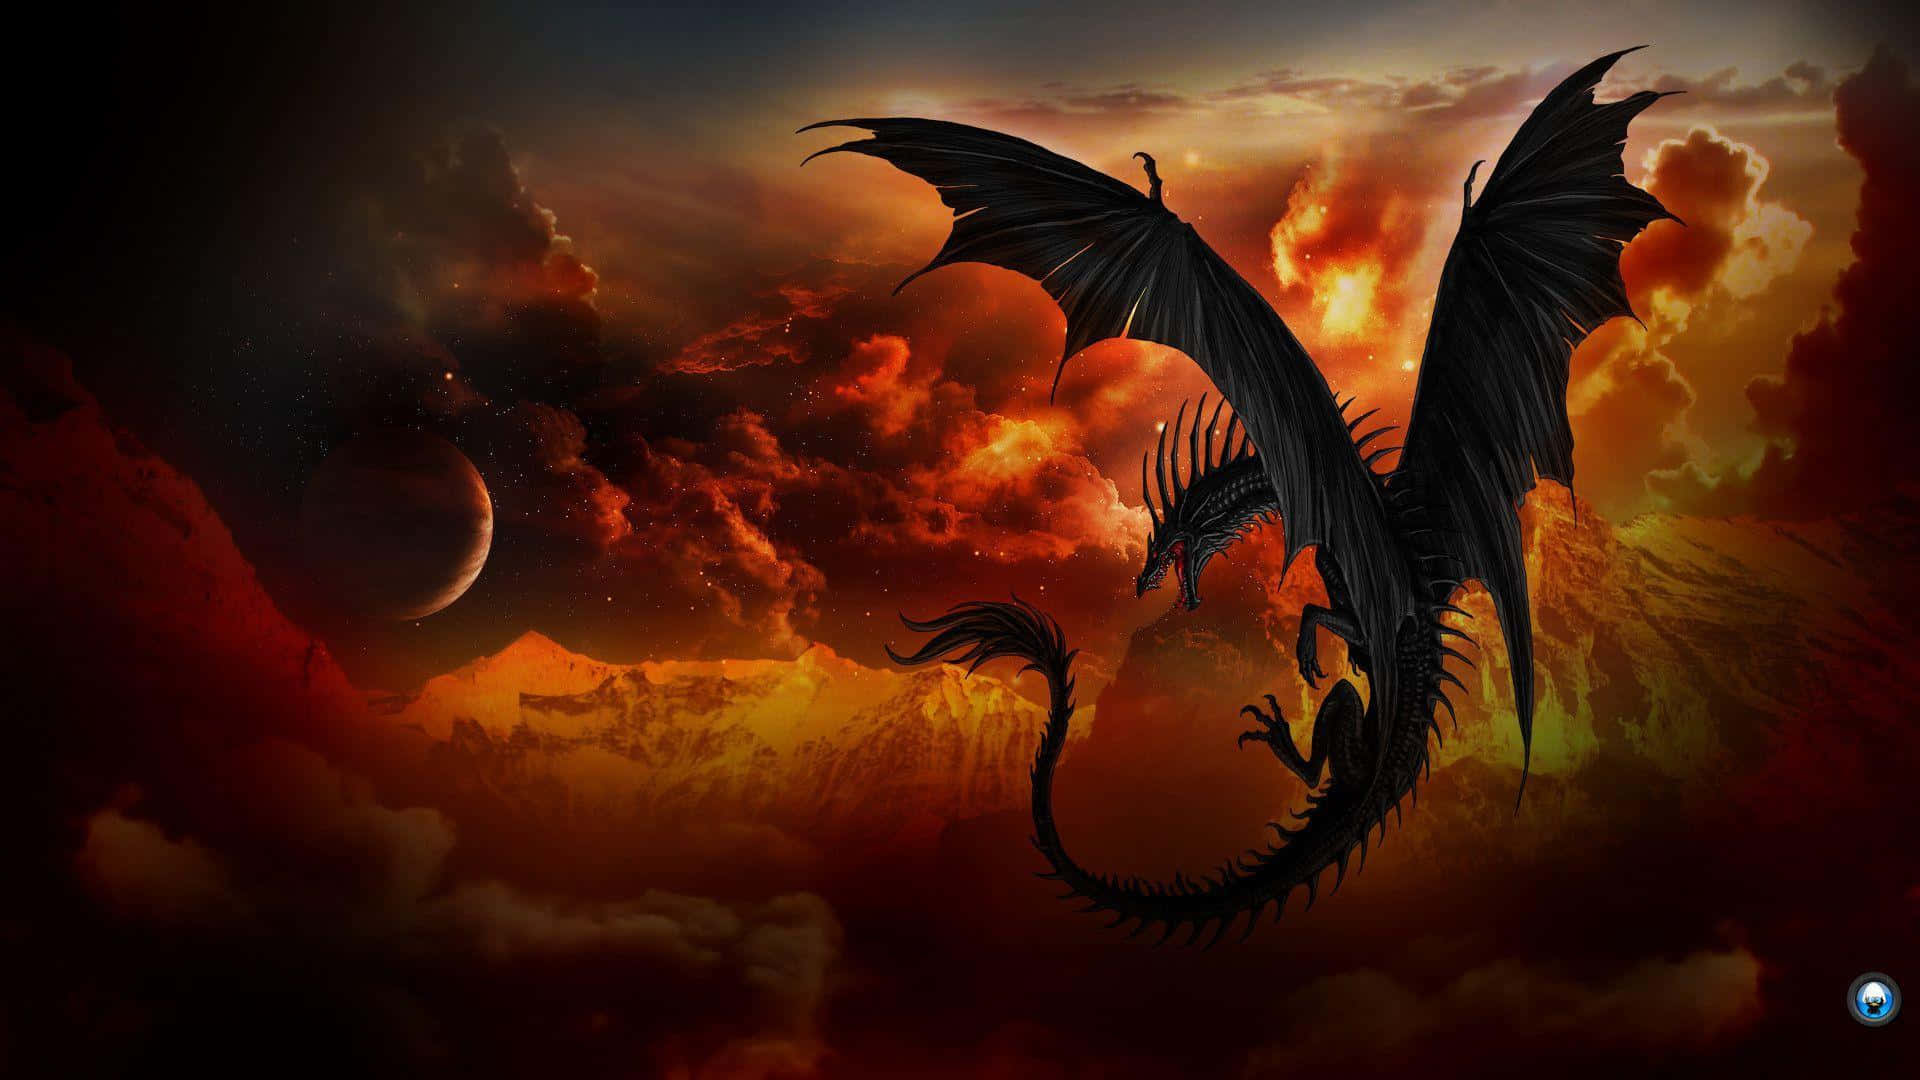 A majestic Real Dragon flying in the sky Wallpaper